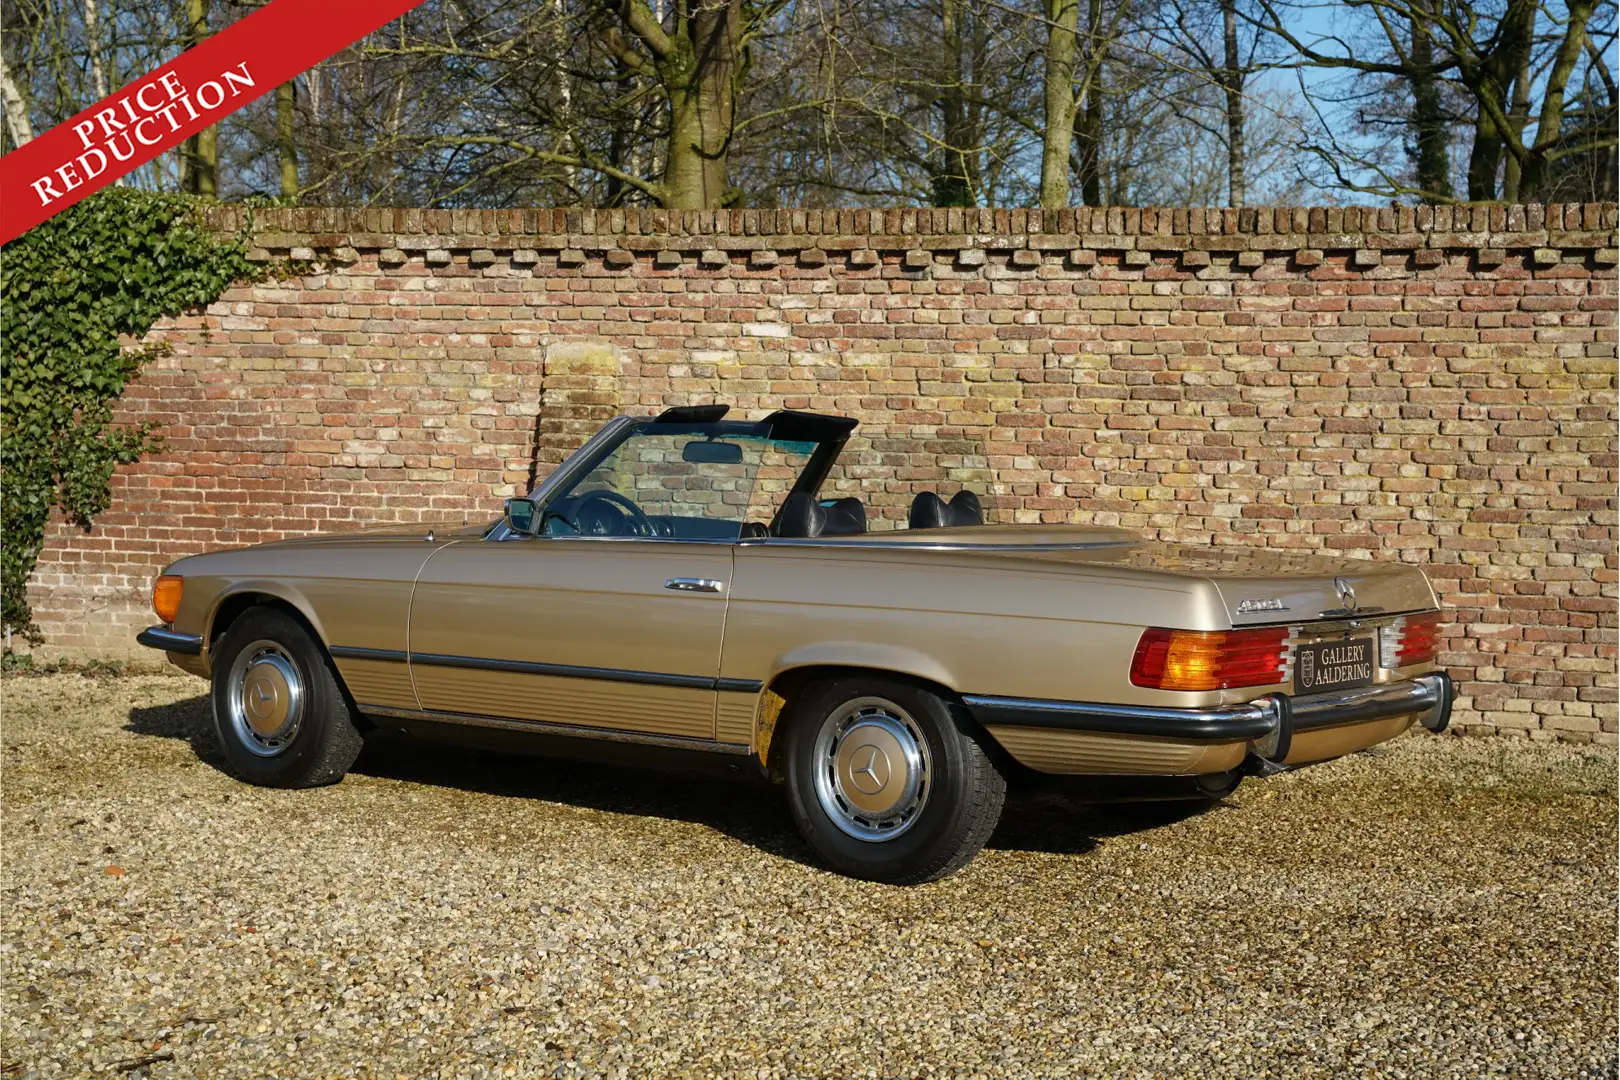 Mercedes-Benz SL 450 PRICE REDUCTION! Livery in Icon Gold (419) over Bl Gold - 2